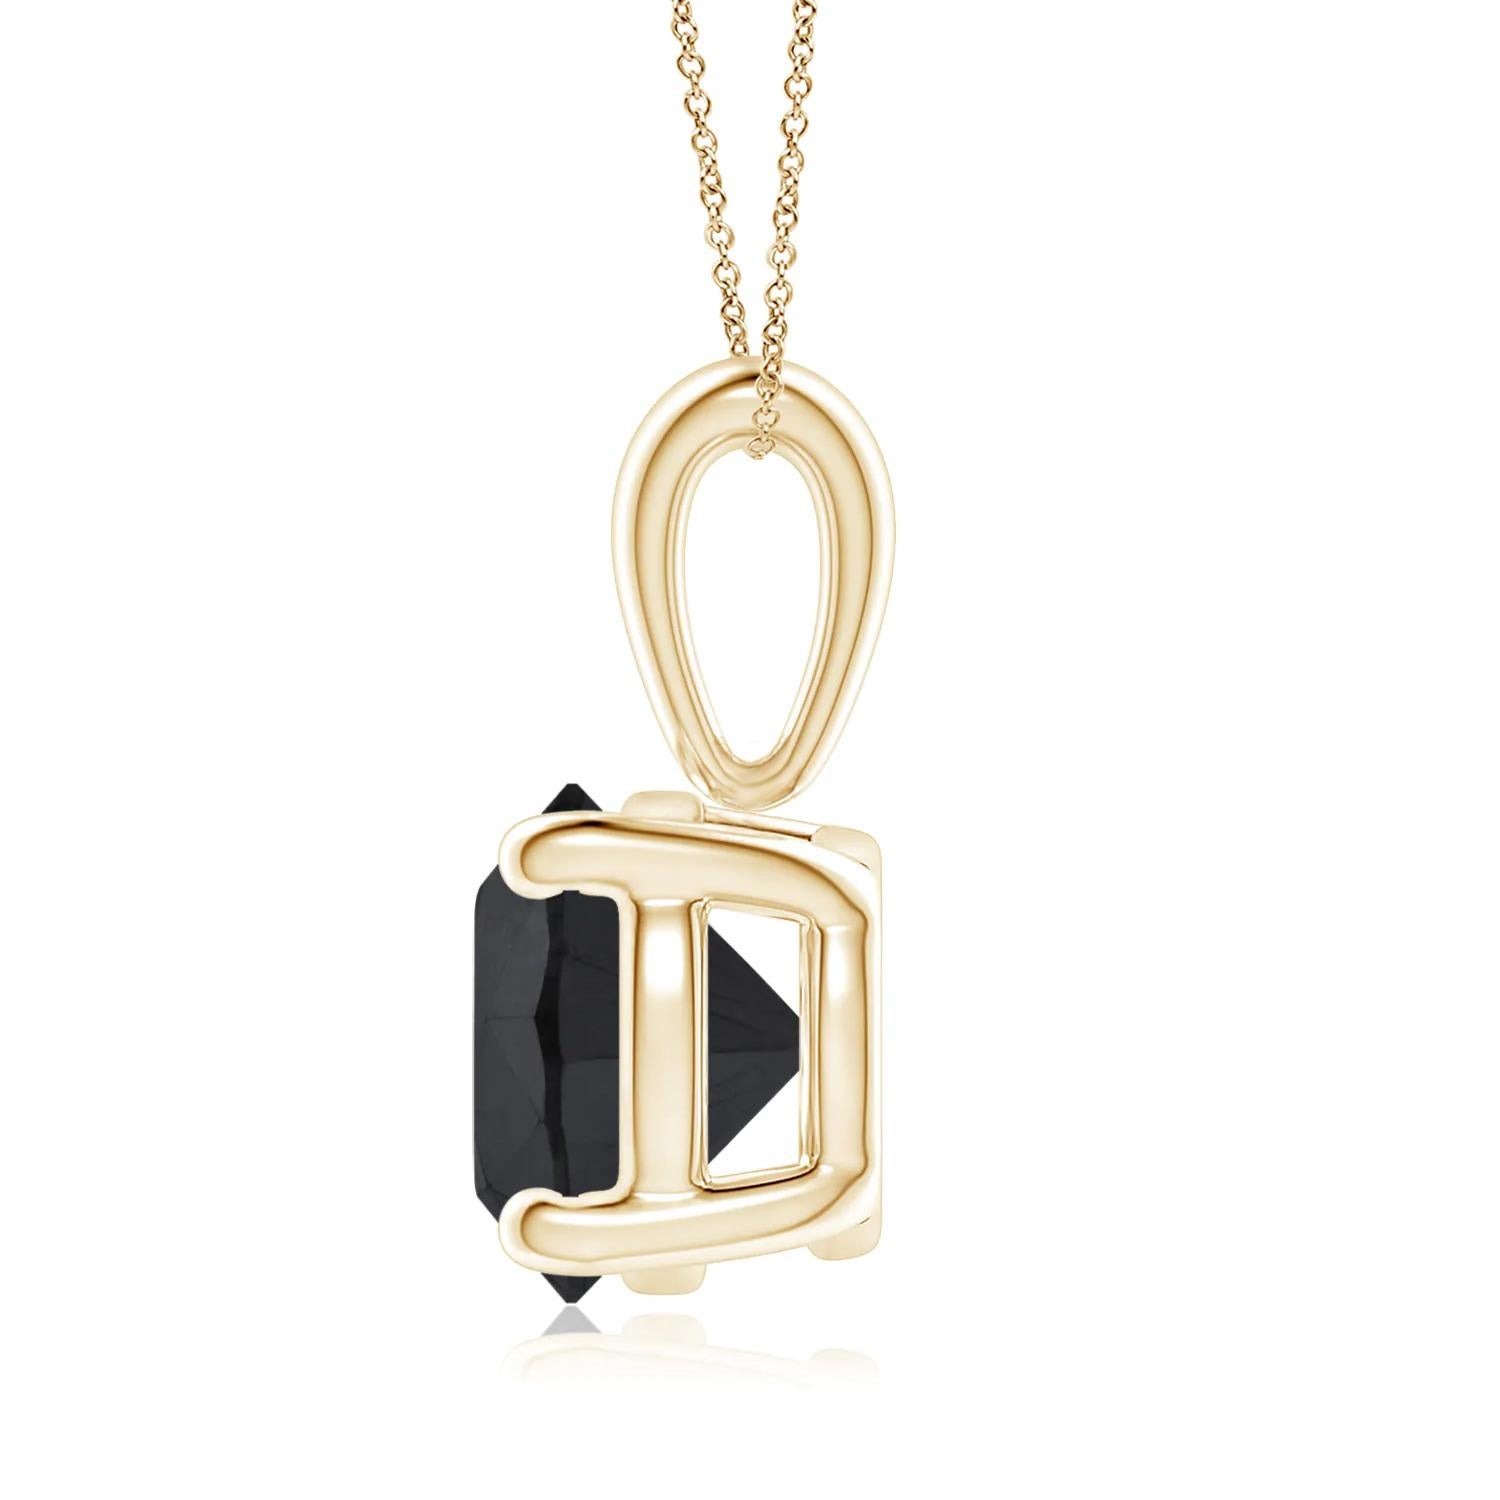 Round Cut 1.6 Carat Round Black Diamond Solitaire Pendant Necklace in 14K Yellow Gold